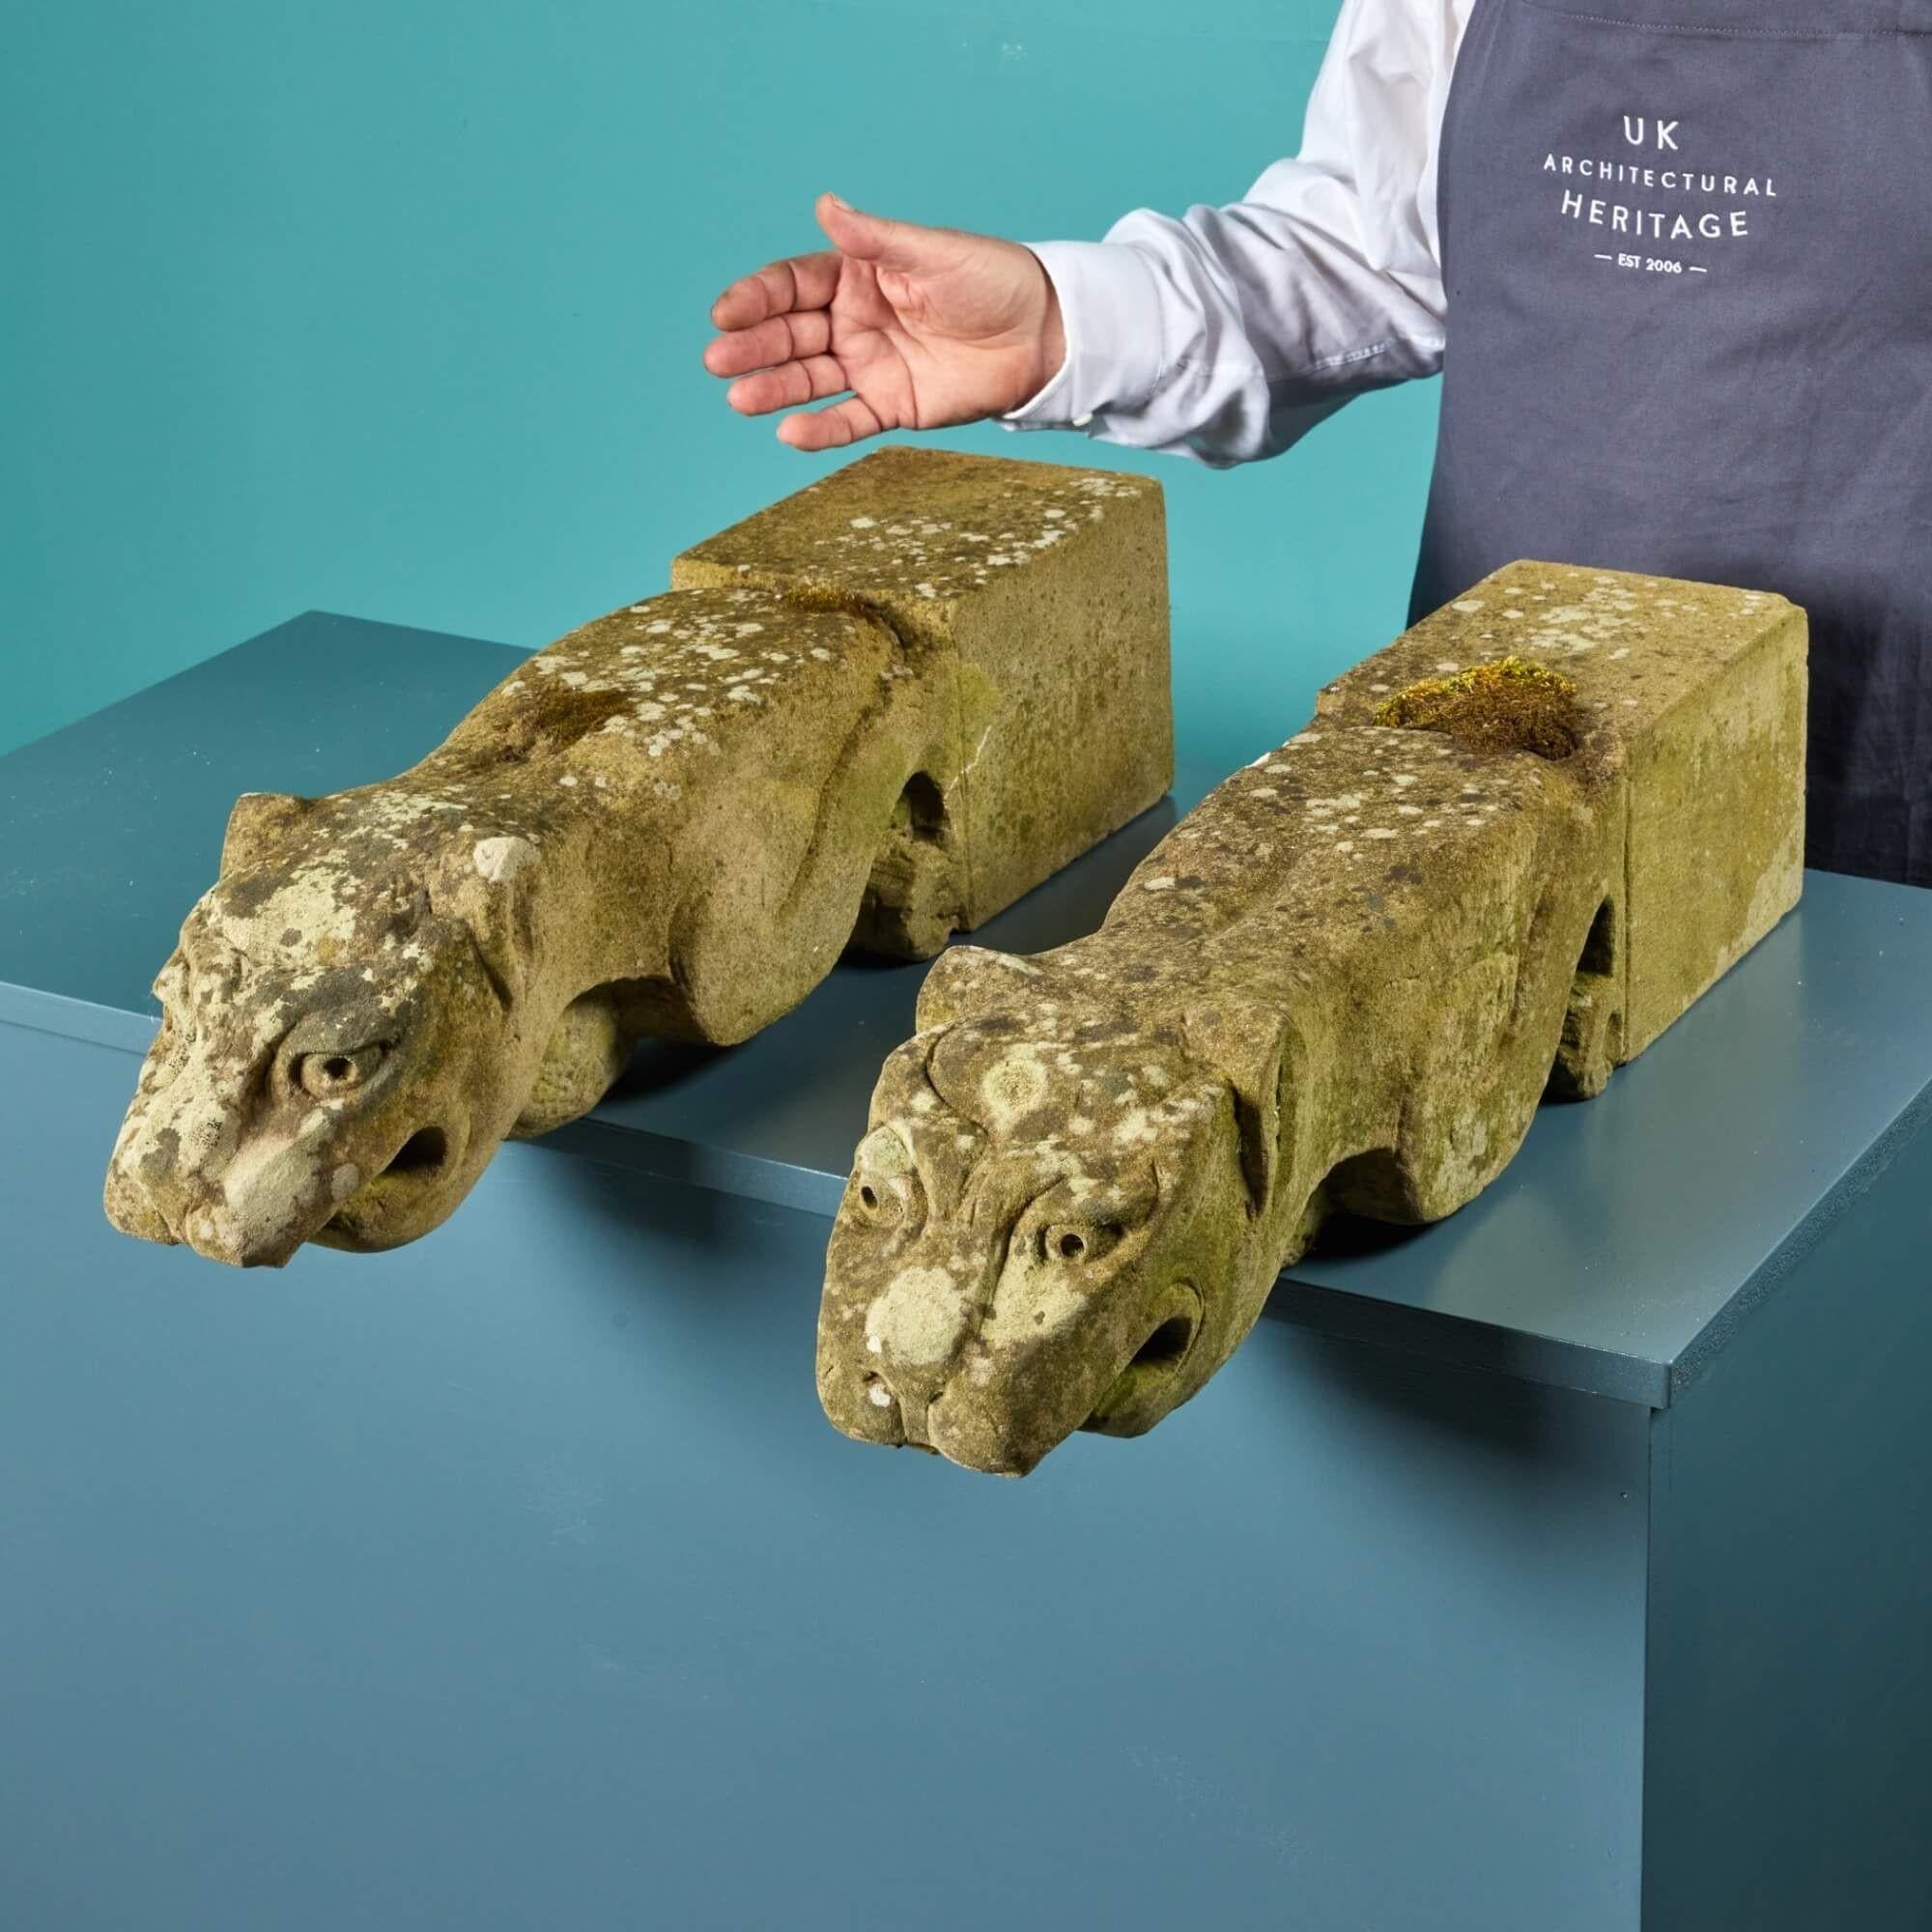 A pair of striking antique stone gargoyles, possibly stylised lions, wolves, or dogs, on rectangular bases, dating from the late 19th / early 20th century. These Gothic gargoyles were once built into a wall, making a dramatic addition to a facade or